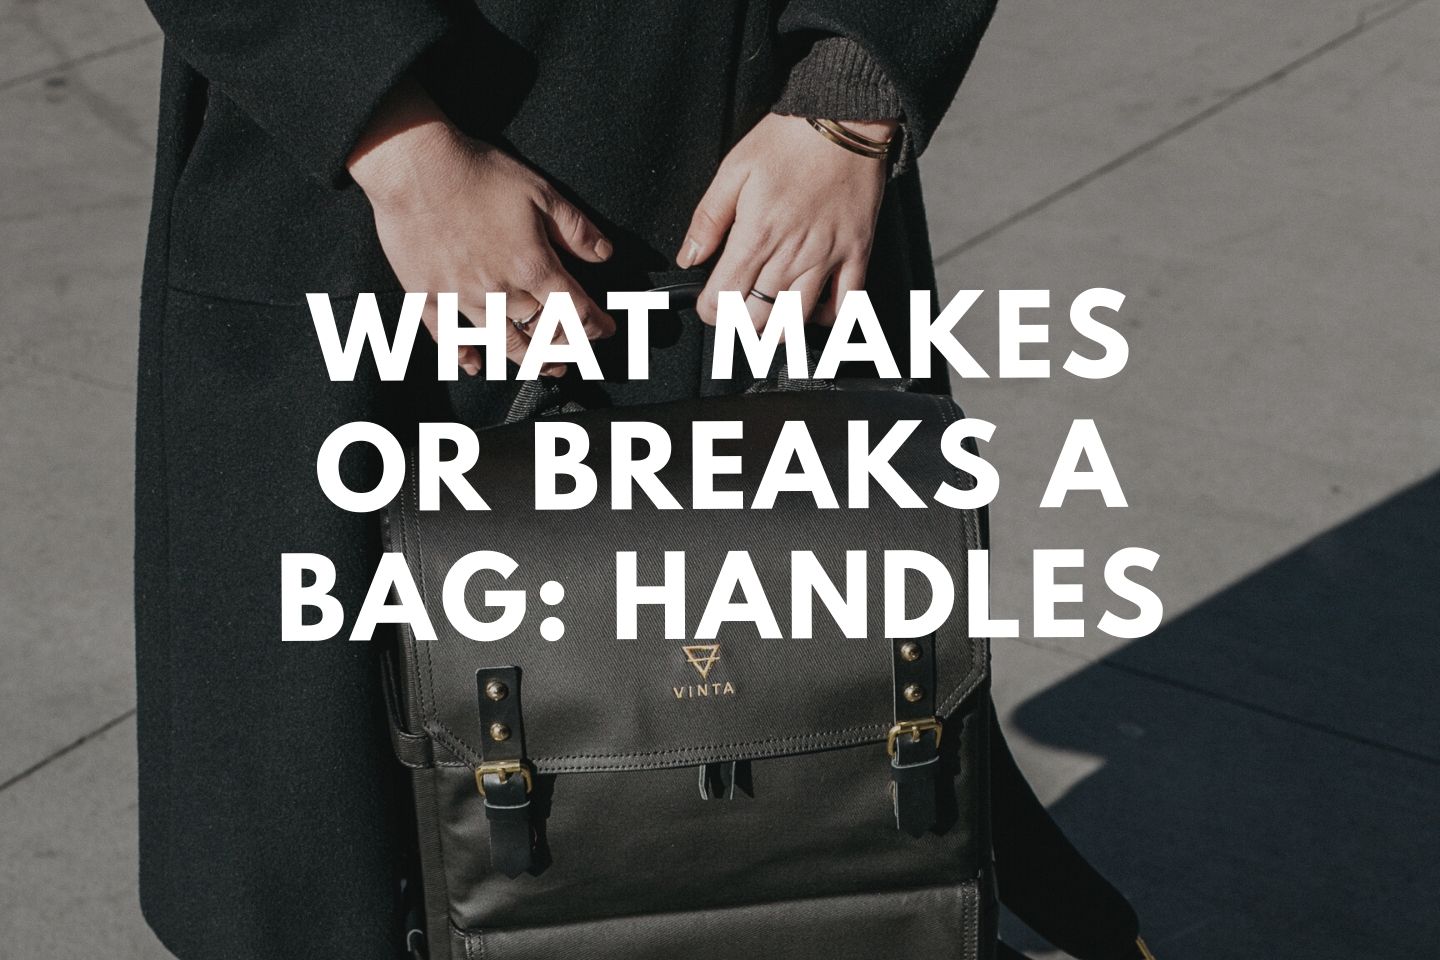 Reasons why you may want to tie or wrap your bag's handles with a